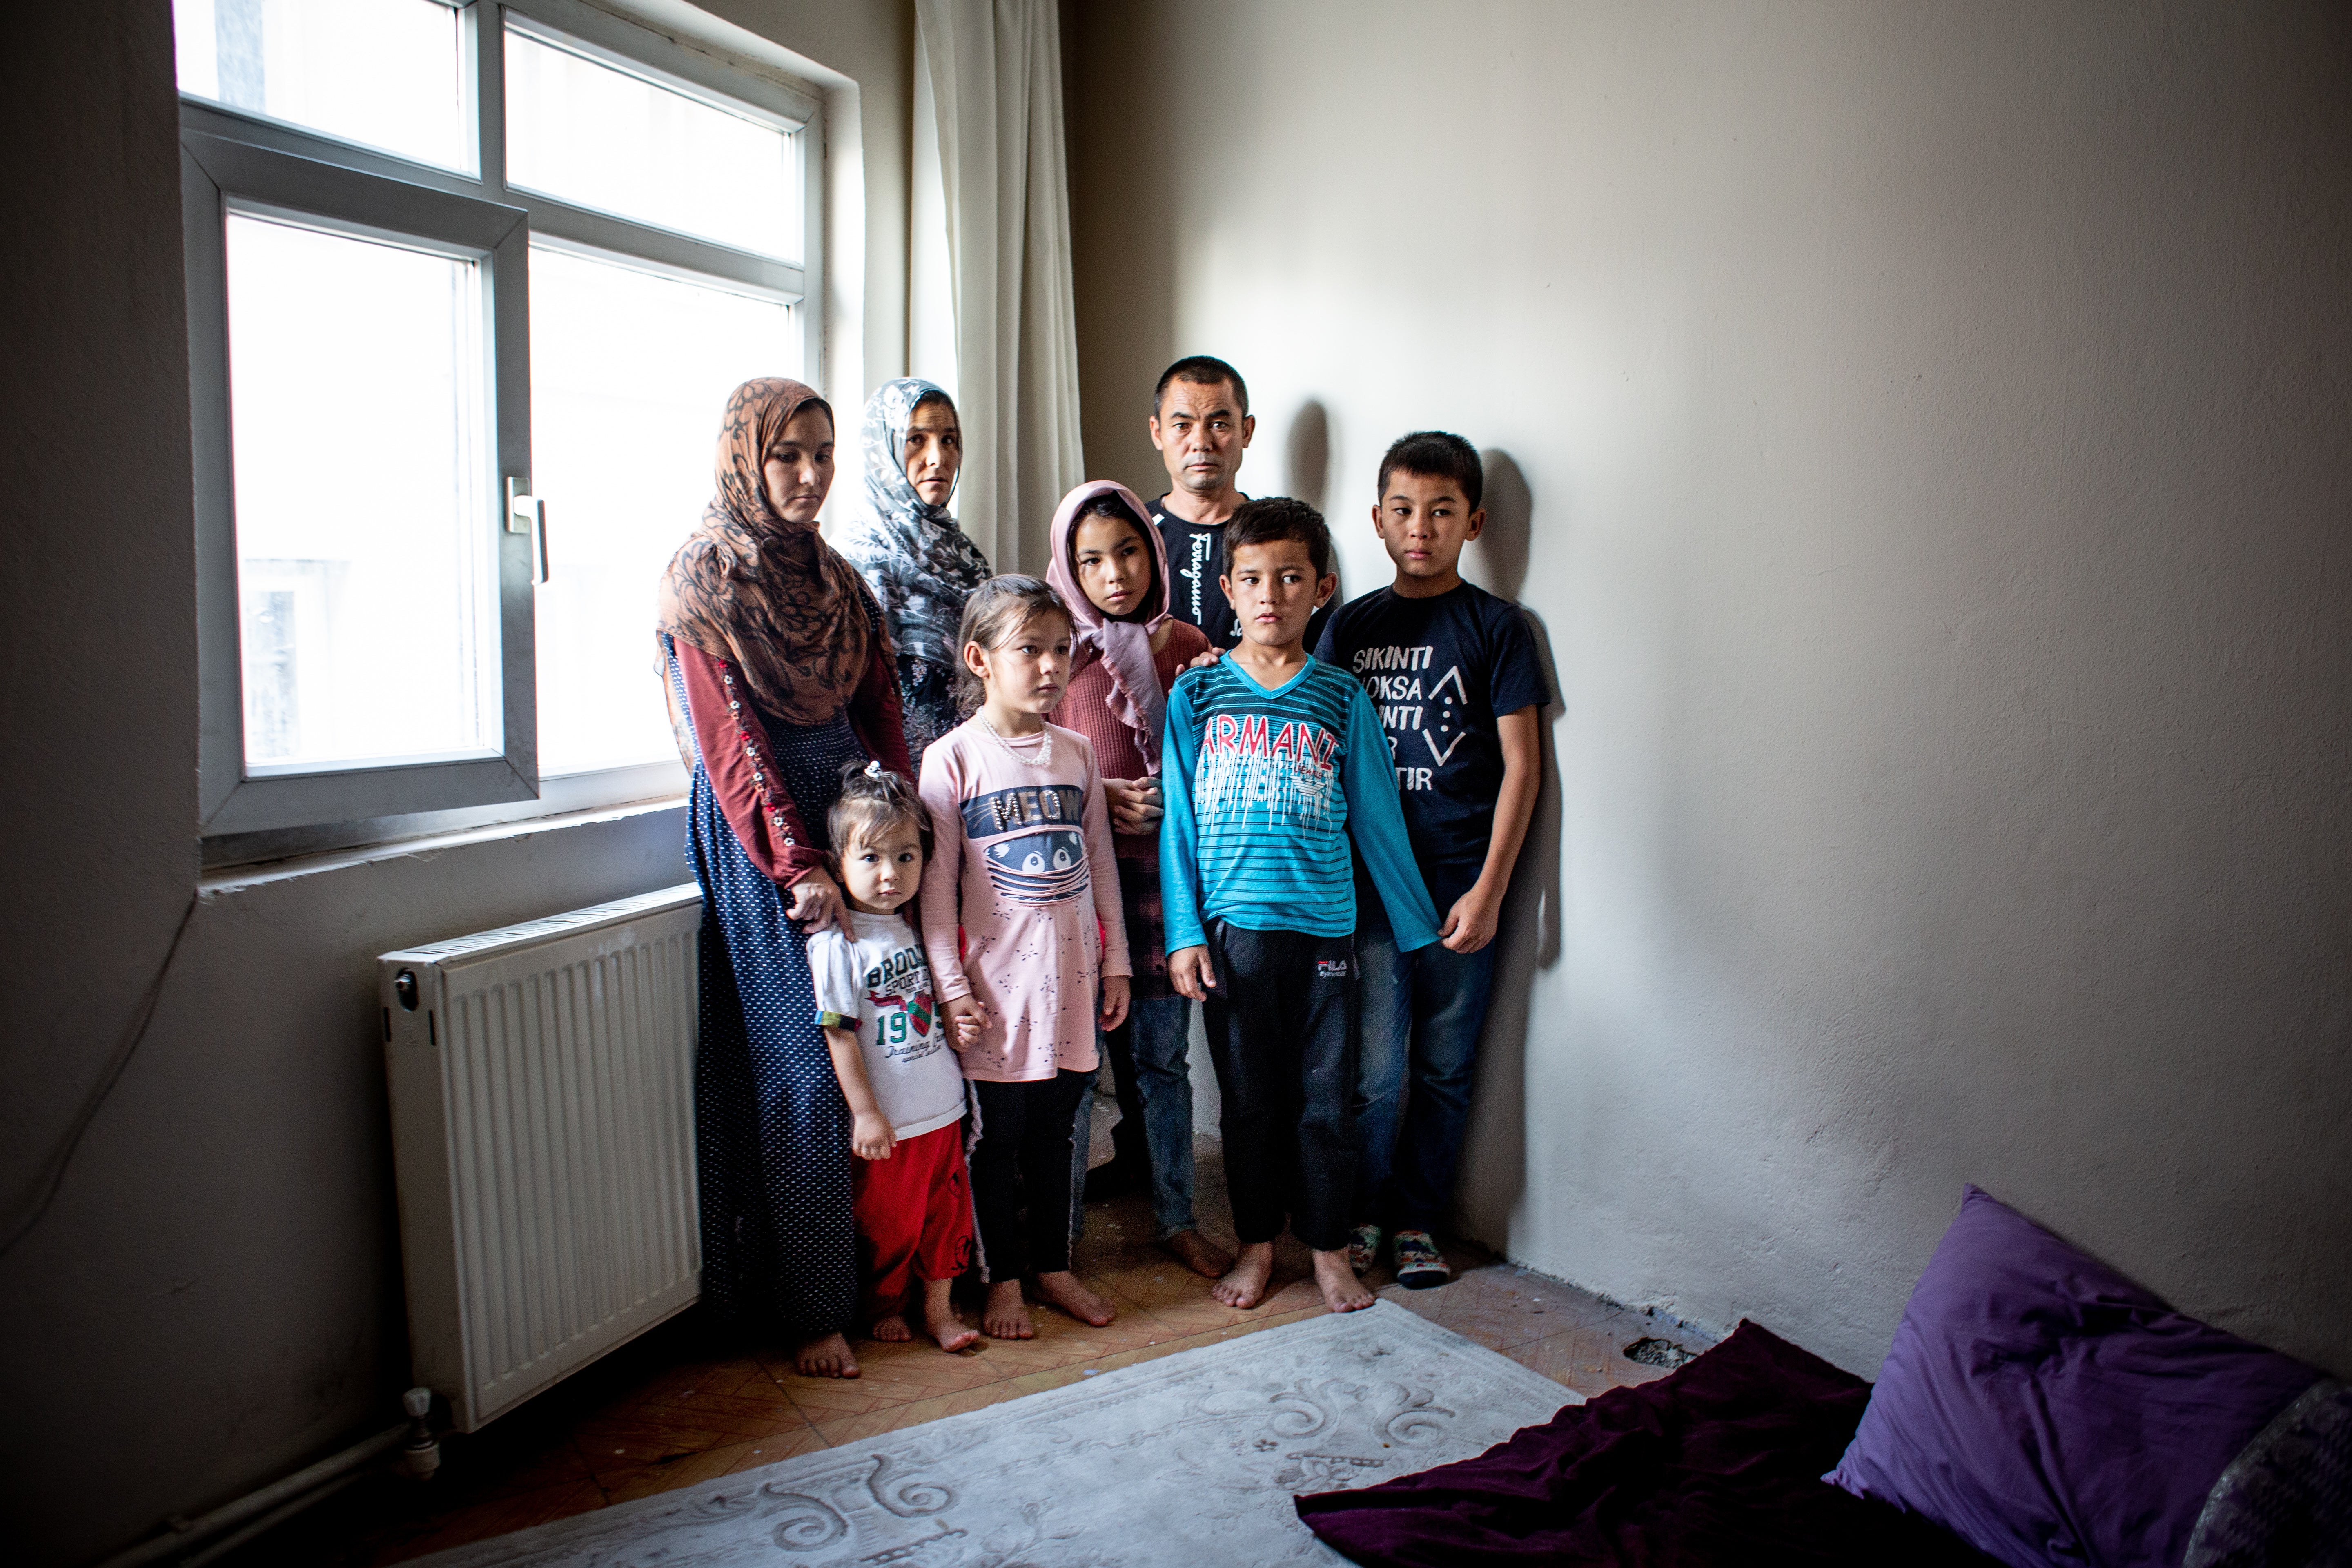 Abdul Kareem Buri, 35, his wife Bibigol, his late brother’s pregnant wife Nasrin-gol, and some of their children pose for a portrait in the Van apartment they have been staying in for nearly a month